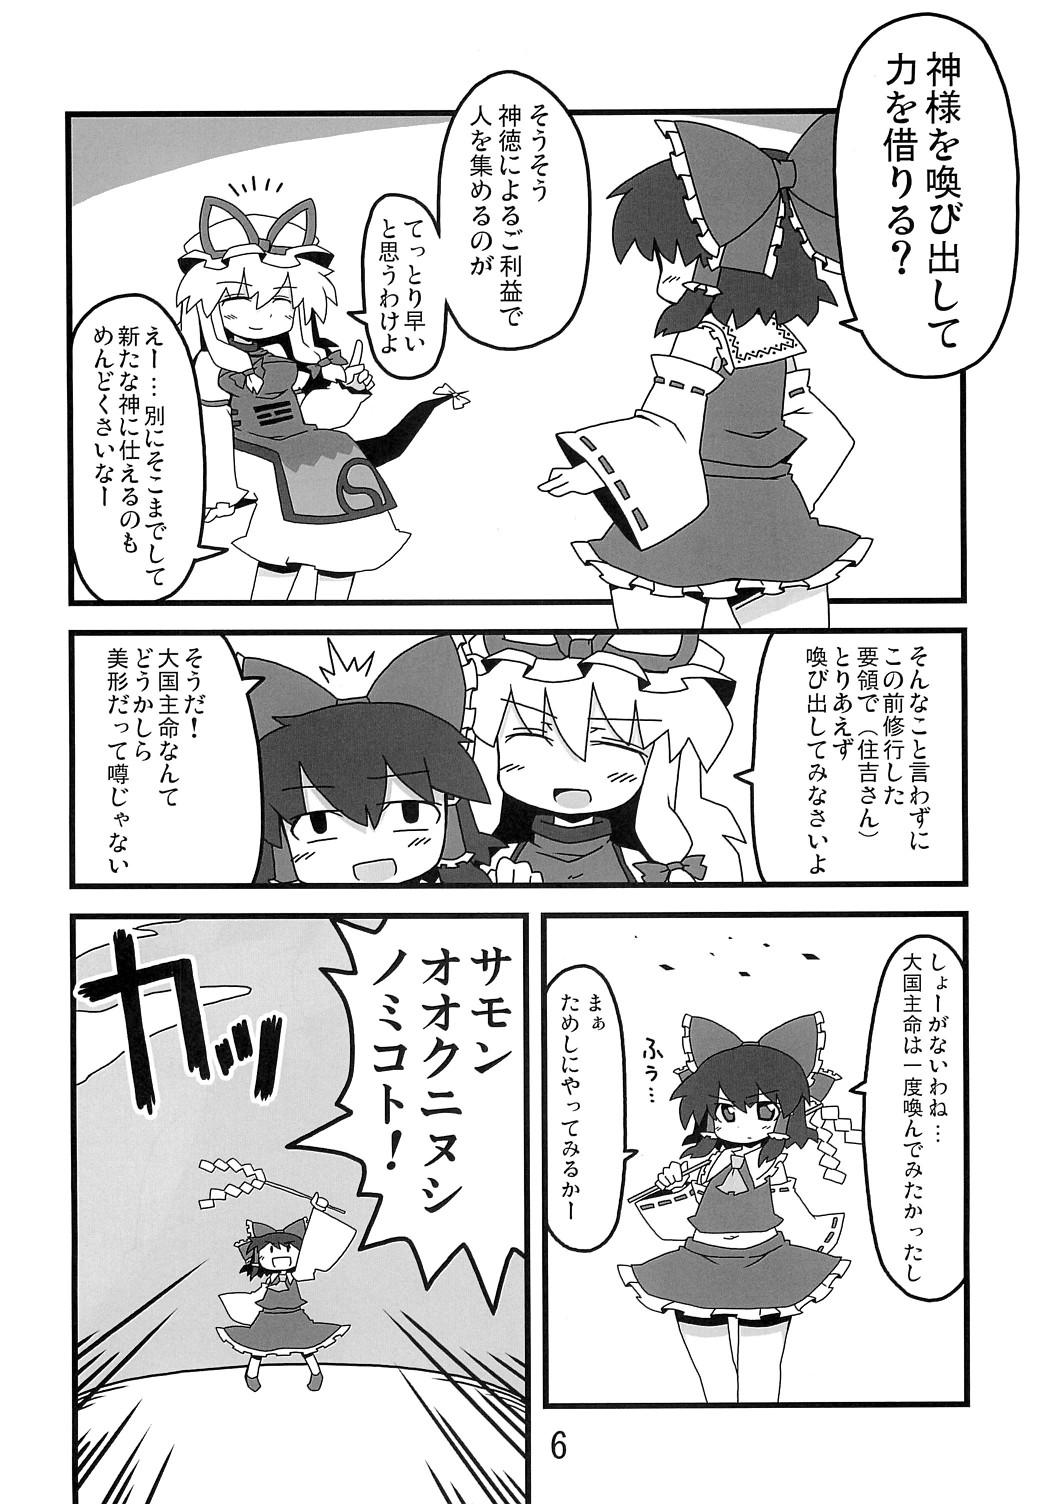 Girls 東方豊年祭 - Touhou project Arabe - Page 5